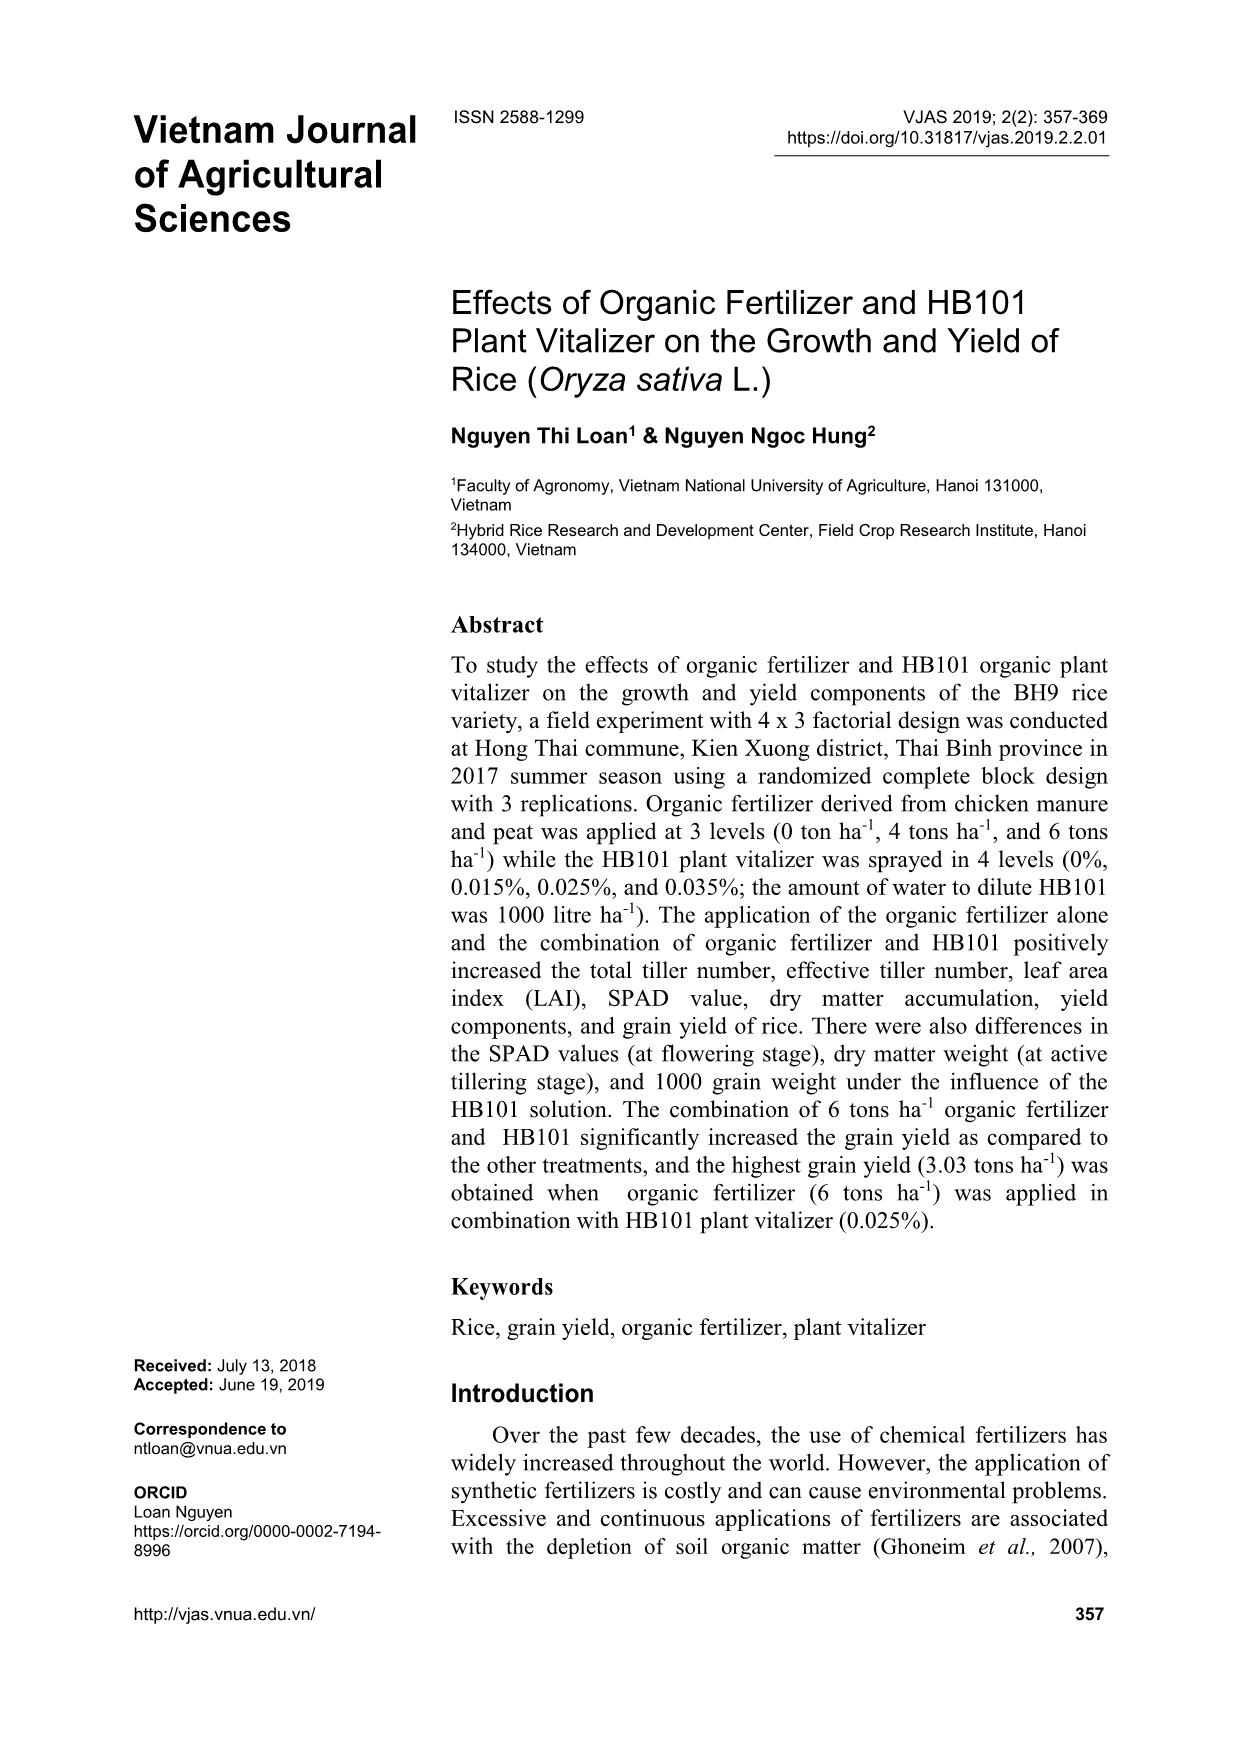 Effects of organic fertilizer and HB101 plant vitalizer on the growth and yield of rice (Oryza sativa L.) trang 1